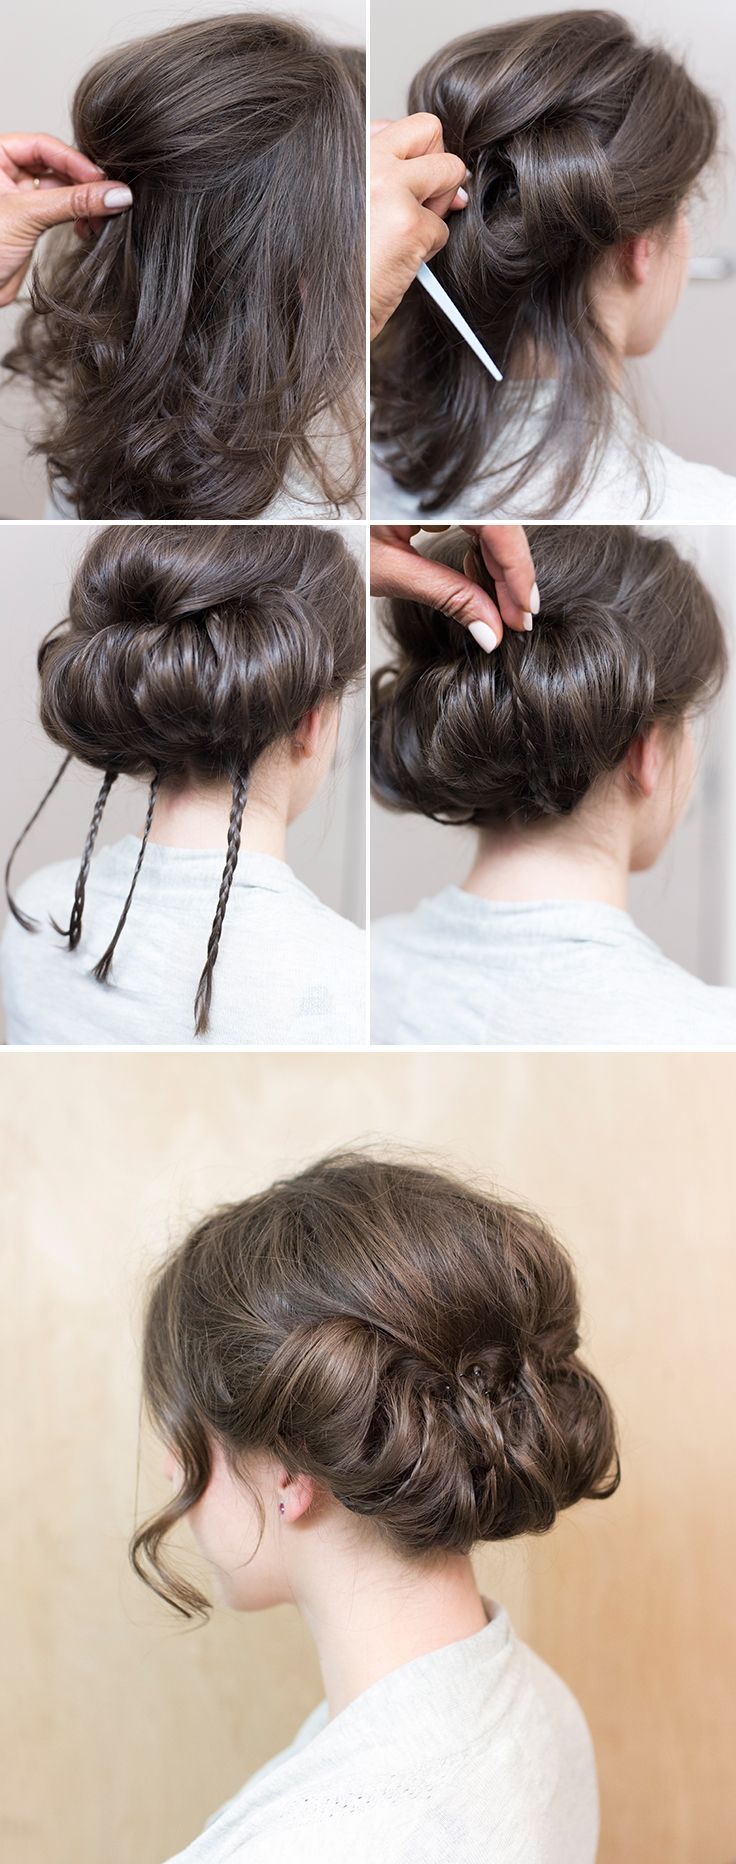 Wedding hair inspiration: An elegant tucked baby braids updo for the classic bride! Perfect for medium and long hair.